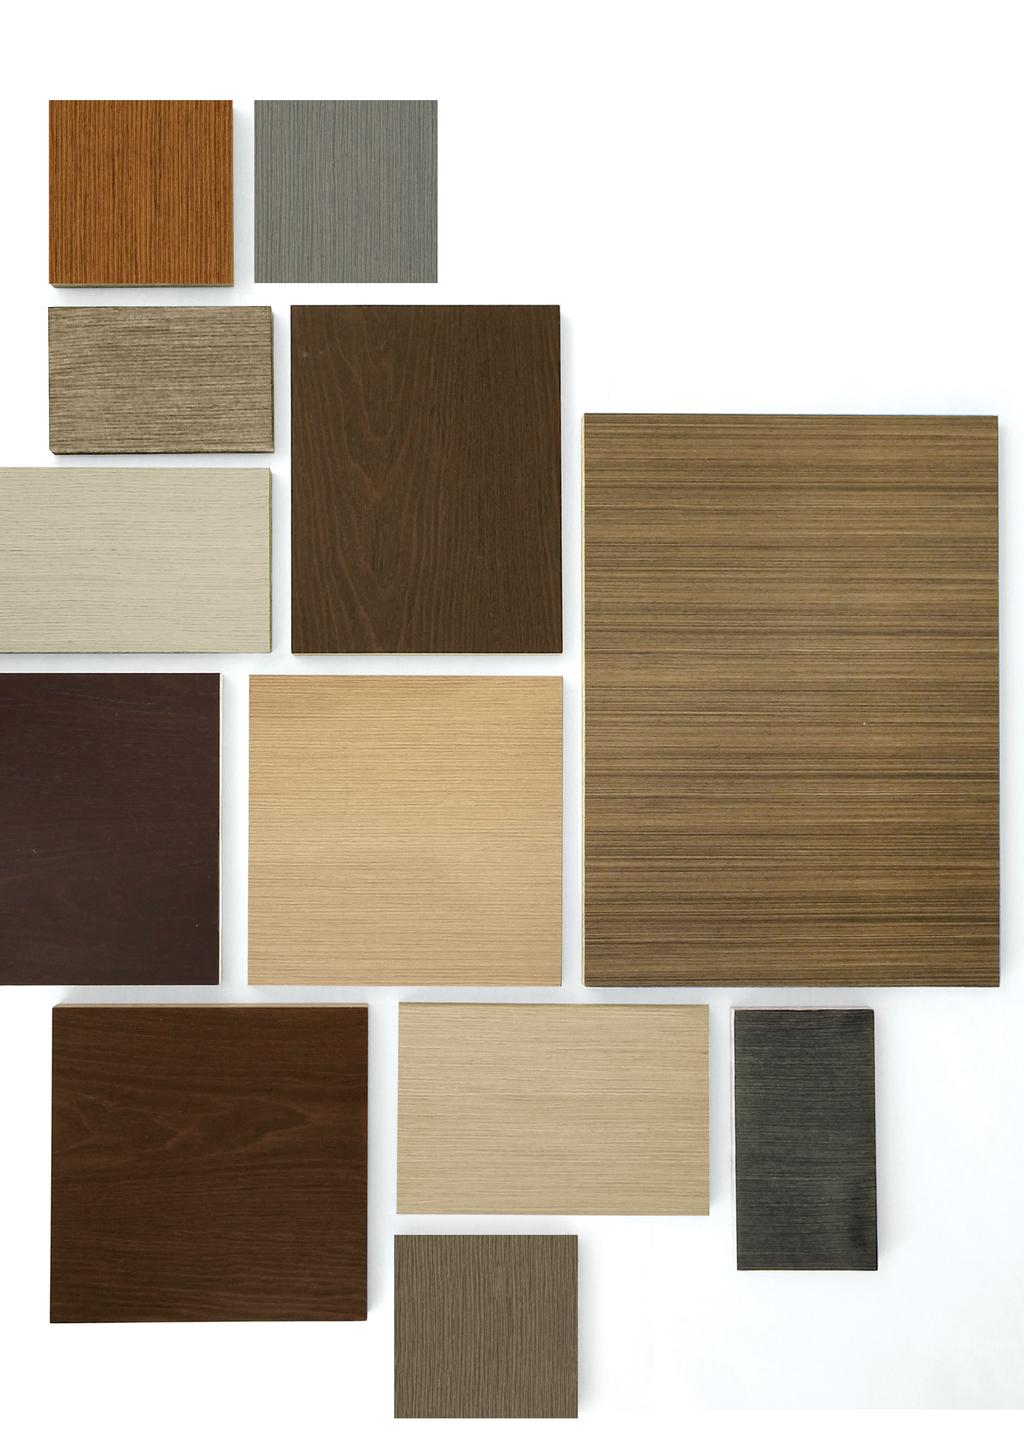 Teknion s Flintwood is an excellent veneer finish for planning with coordinating furniture within a floor plate.